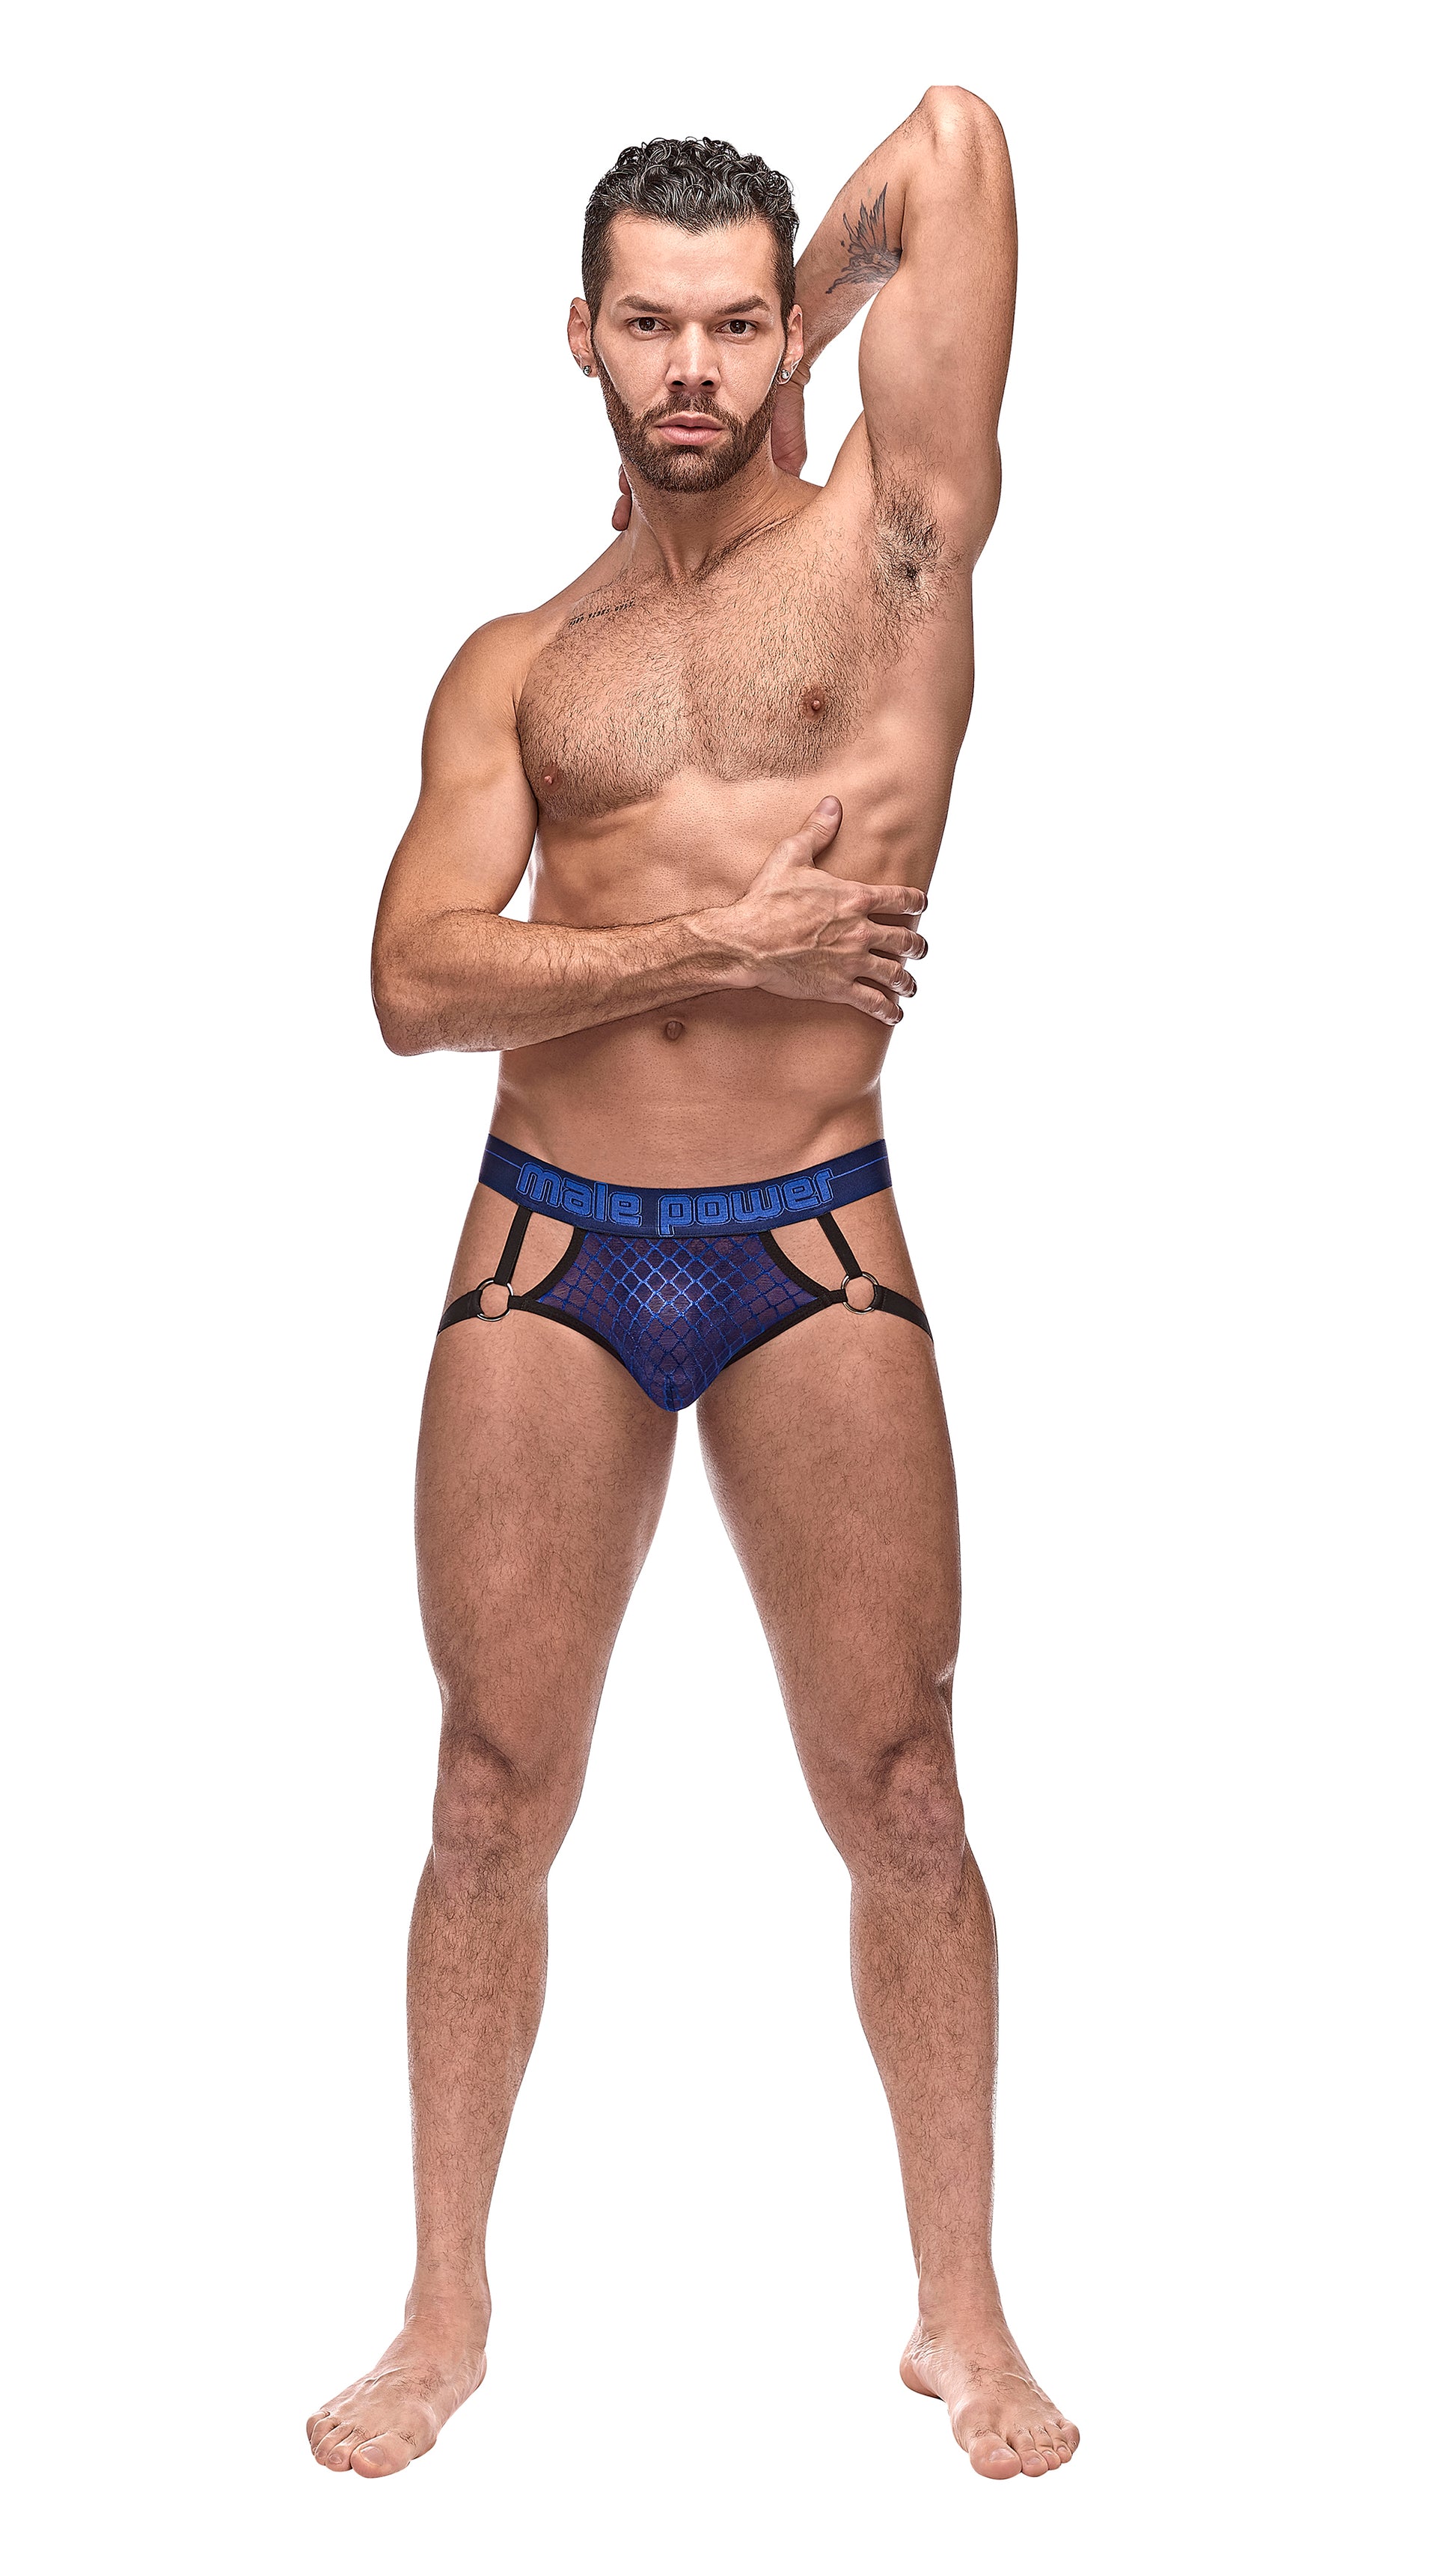 Sex appeal is glimmering from this Diamond Mesh Ring Jock. Plush elastic straps attached to O-rings accentuate the front pouch while exposing your rear. From working out to play, this cool jock has you covered.